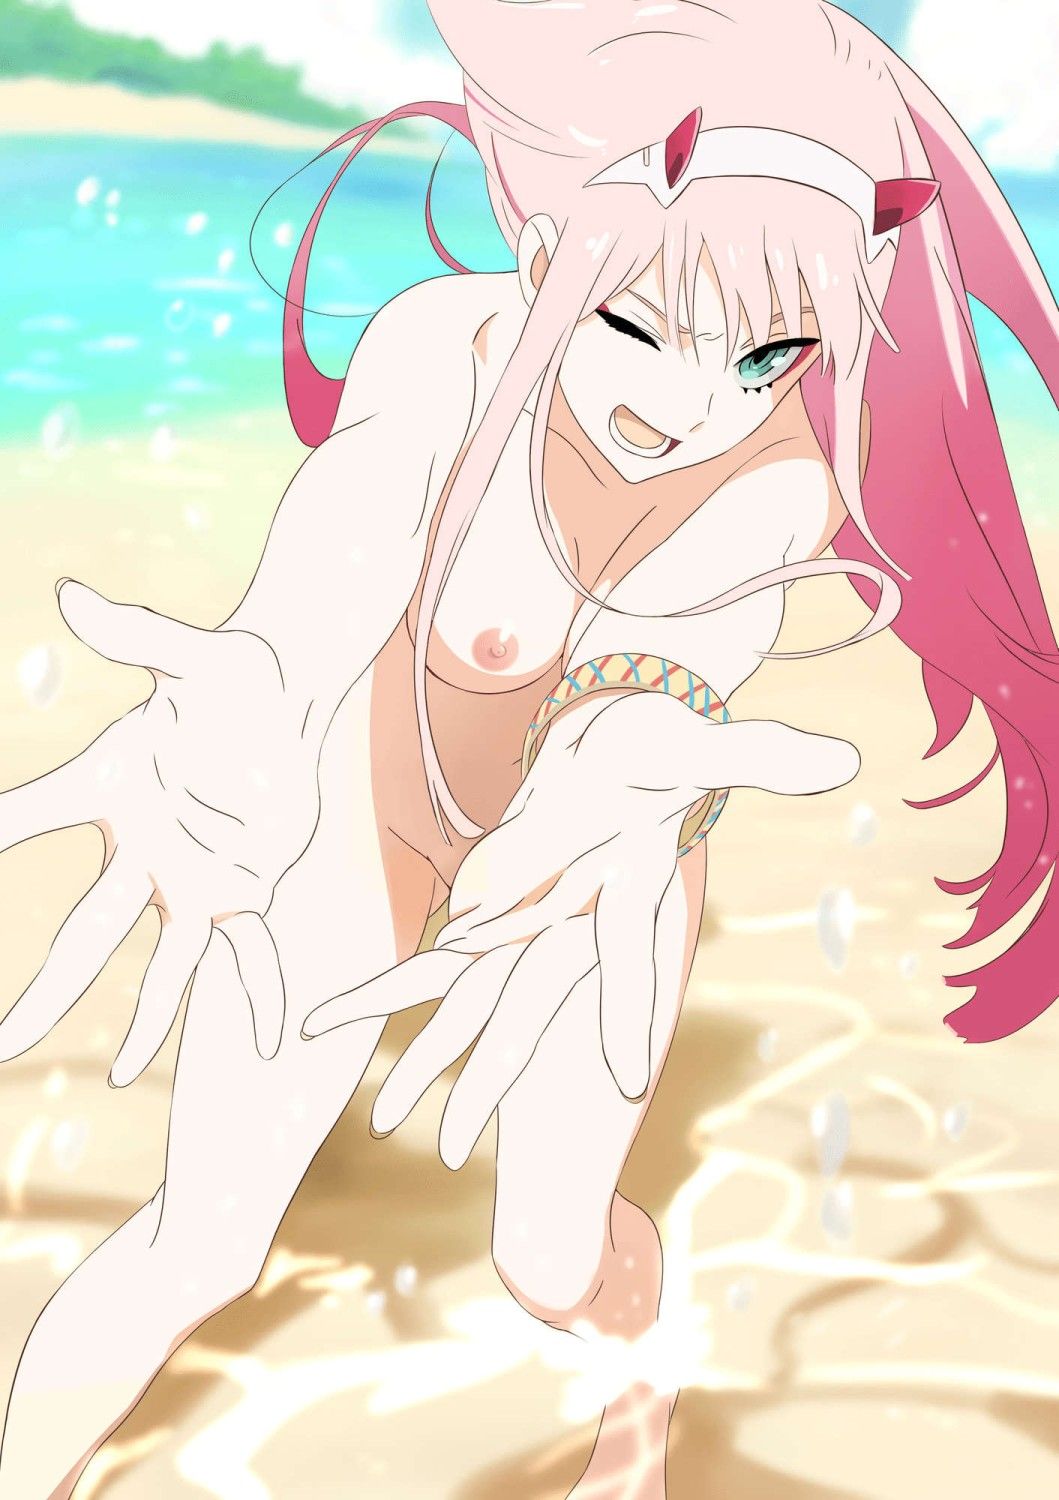 Darling in the Frankis stripped off Photoshop 6